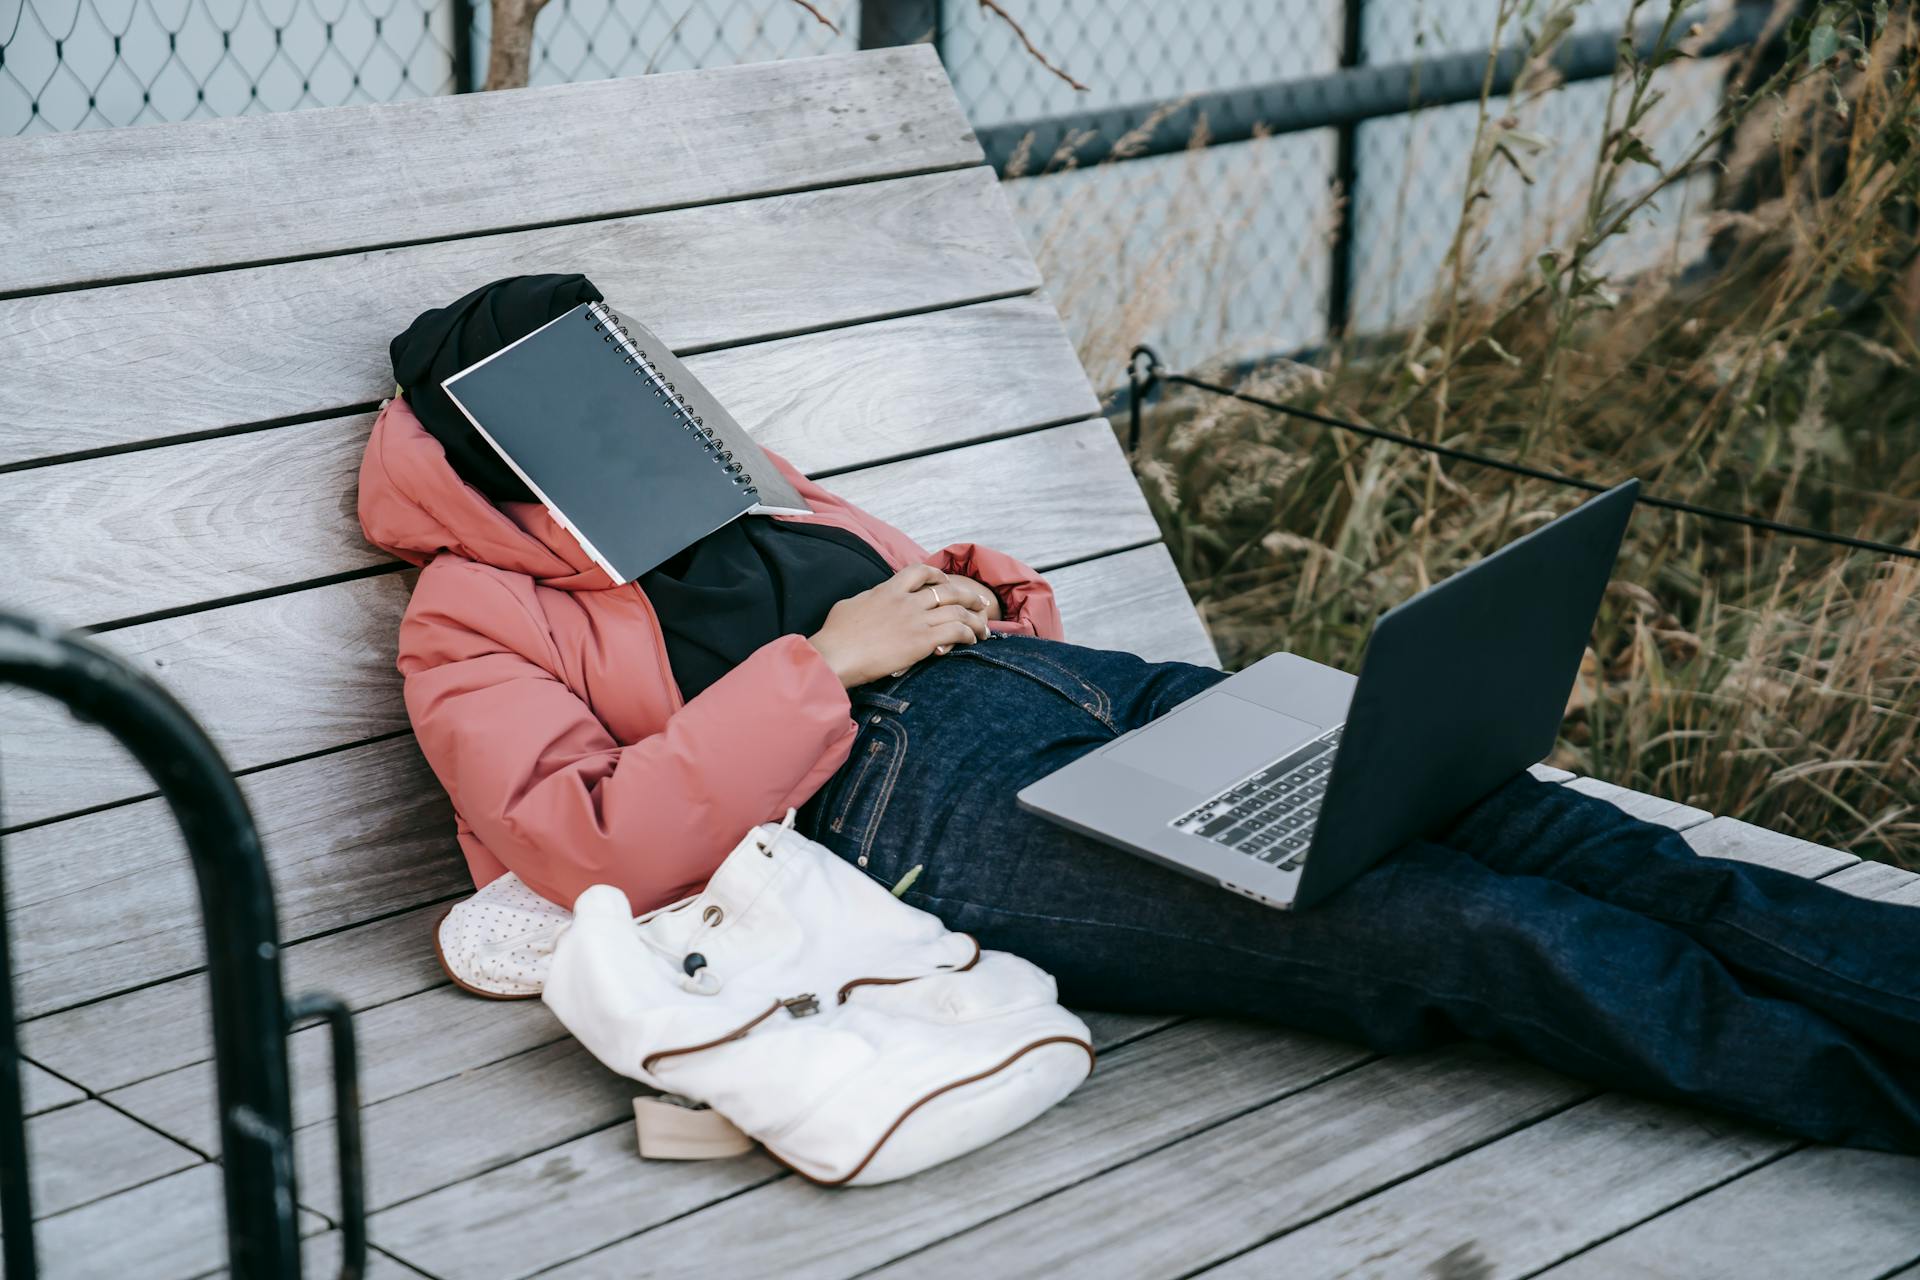 An unrecognizable woman with an open laptop resting on a bench with a book on her face | Source: Pexels